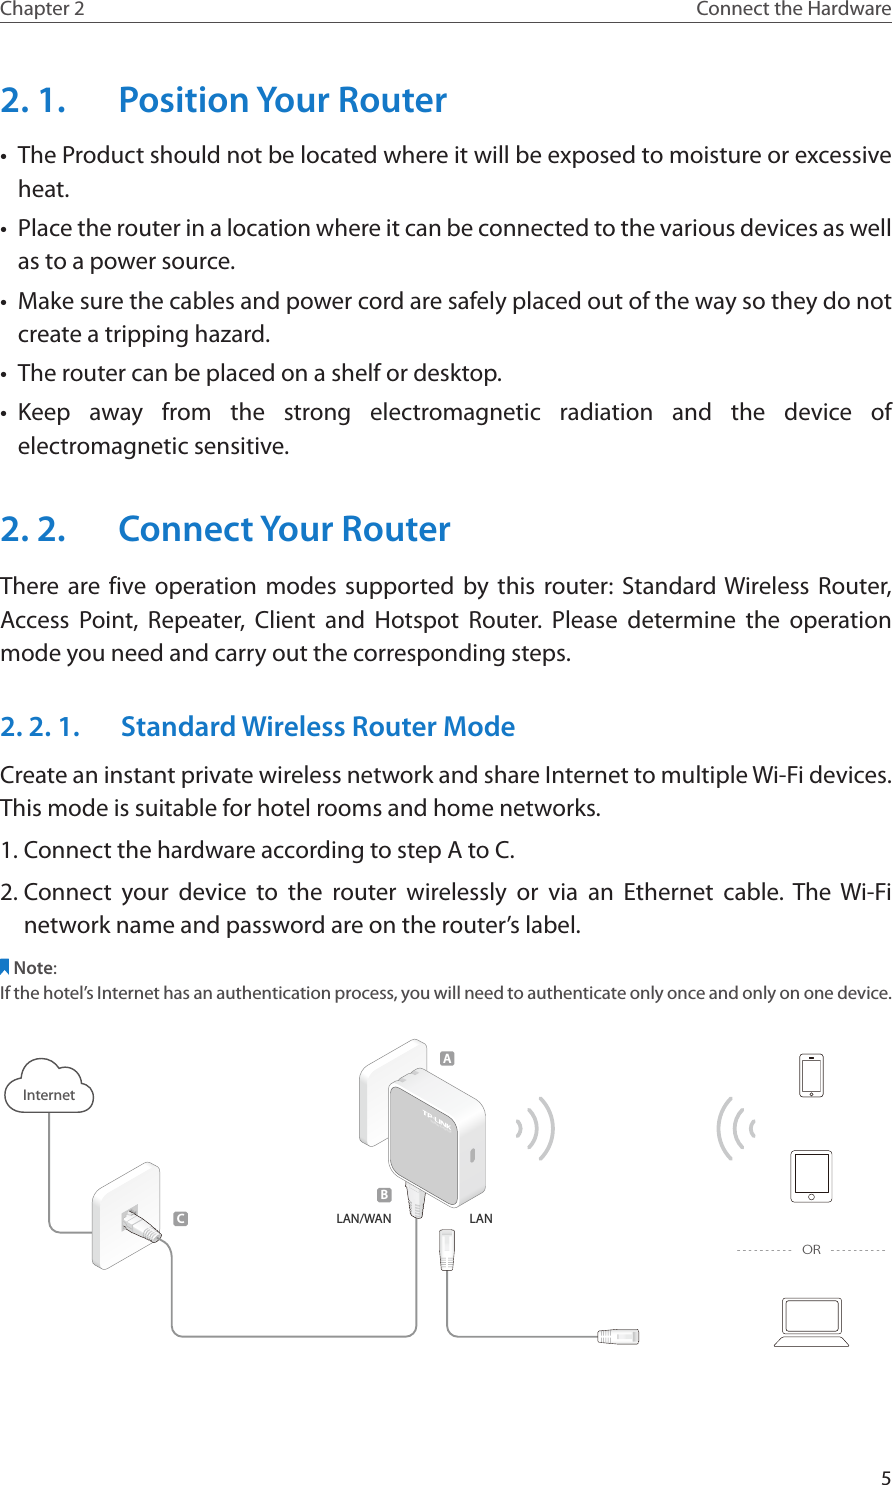 5Chapter 2 Connect the Hardware2. 1.  Position Your Router•  The Product should not be located where it will be exposed to moisture or excessive heat.•  Place the router in a location where it can be connected to the various devices as well as to a power source.•  Make sure the cables and power cord are safely placed out of the way so they do not create a tripping hazard.•  The router can be placed on a shelf or desktop.•  Keep away from the strong electromagnetic radiation and the device of electromagnetic sensitive.2. 2.  Connect Your RouterThere are five operation modes supported by this router: Standard Wireless Router, Access Point, Repeater, Client and Hotspot Router. Please determine the operation mode you need and carry out the corresponding steps.2. 2. 1.  Standard Wireless Router ModeCreate an instant private wireless network and share Internet to multiple Wi-Fi devices. This mode is suitable for hotel rooms and home networks.1. Connect the hardware according to step A to C.2. Connect your device to the router wirelessly or via an Ethernet cable. The Wi-Fi network name and password are on the router’s label.Note:If the hotel’s Internet has an authentication process, you will need to authenticate only once and only on one device.LAN/WANInternet300Mbps TL-WR810NBCALANOR